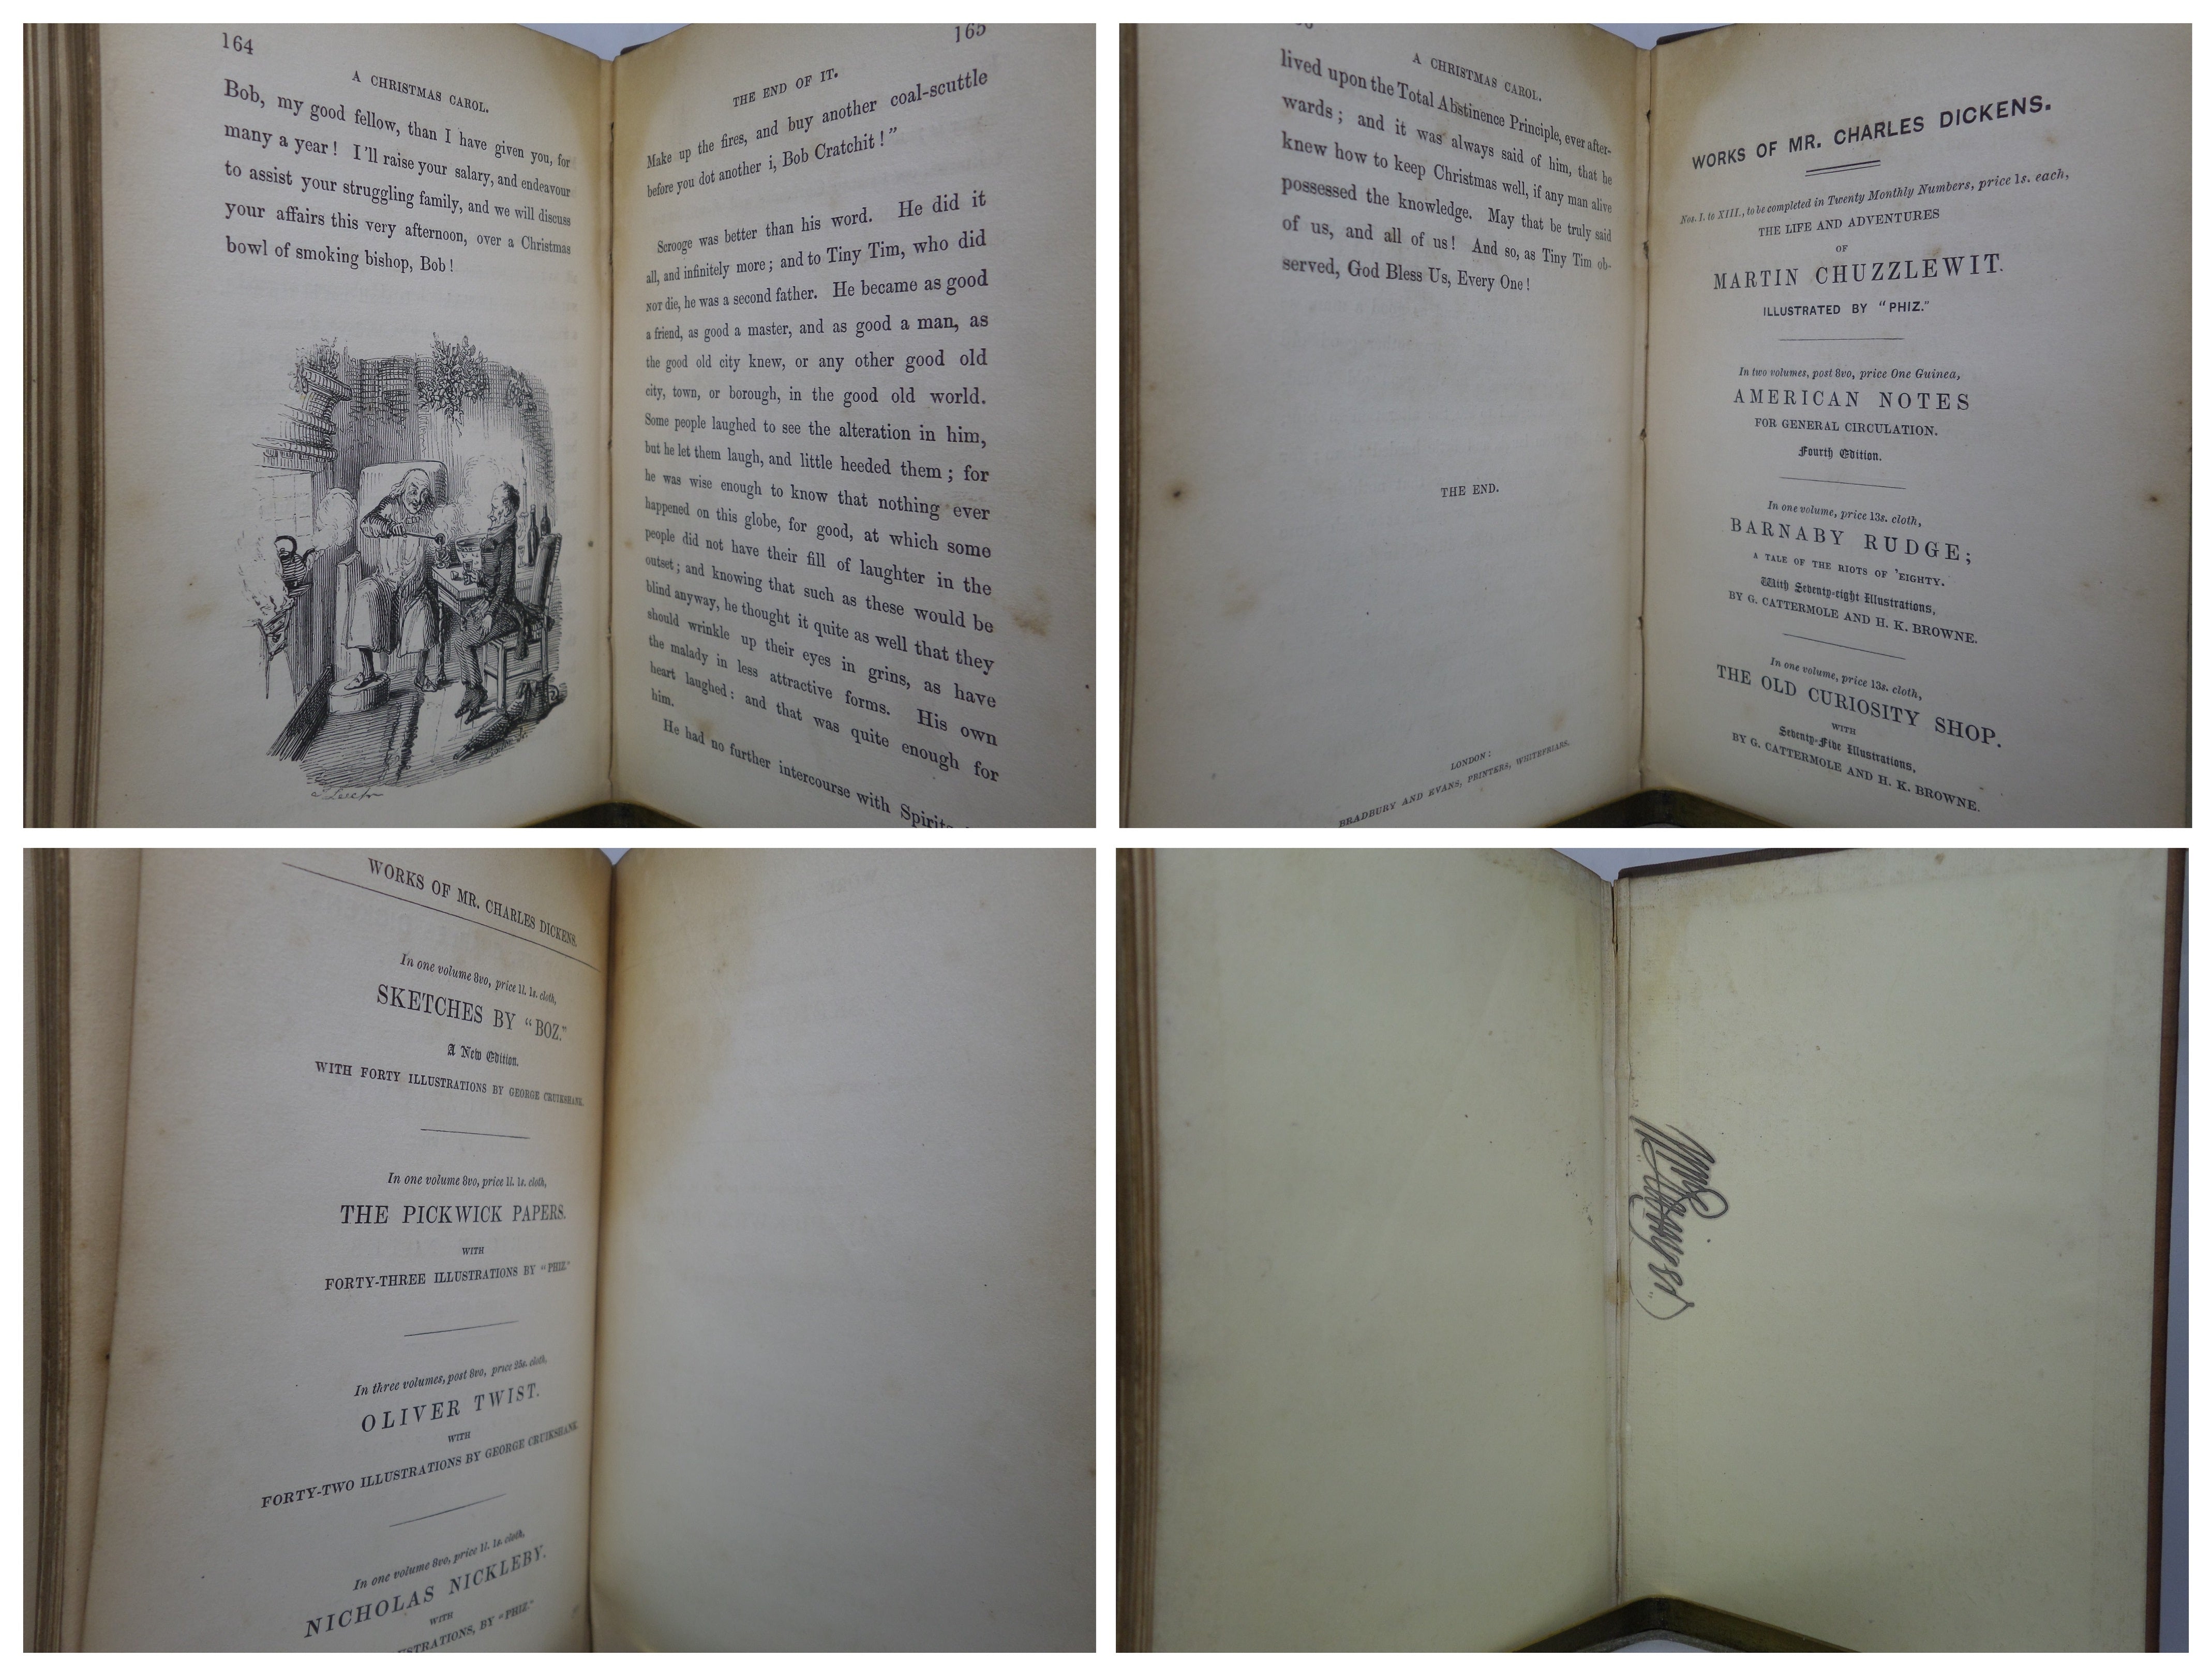 A CHRISTMAS CAROL BY CHARLES DICKENS 1844 SIXTH EDITION